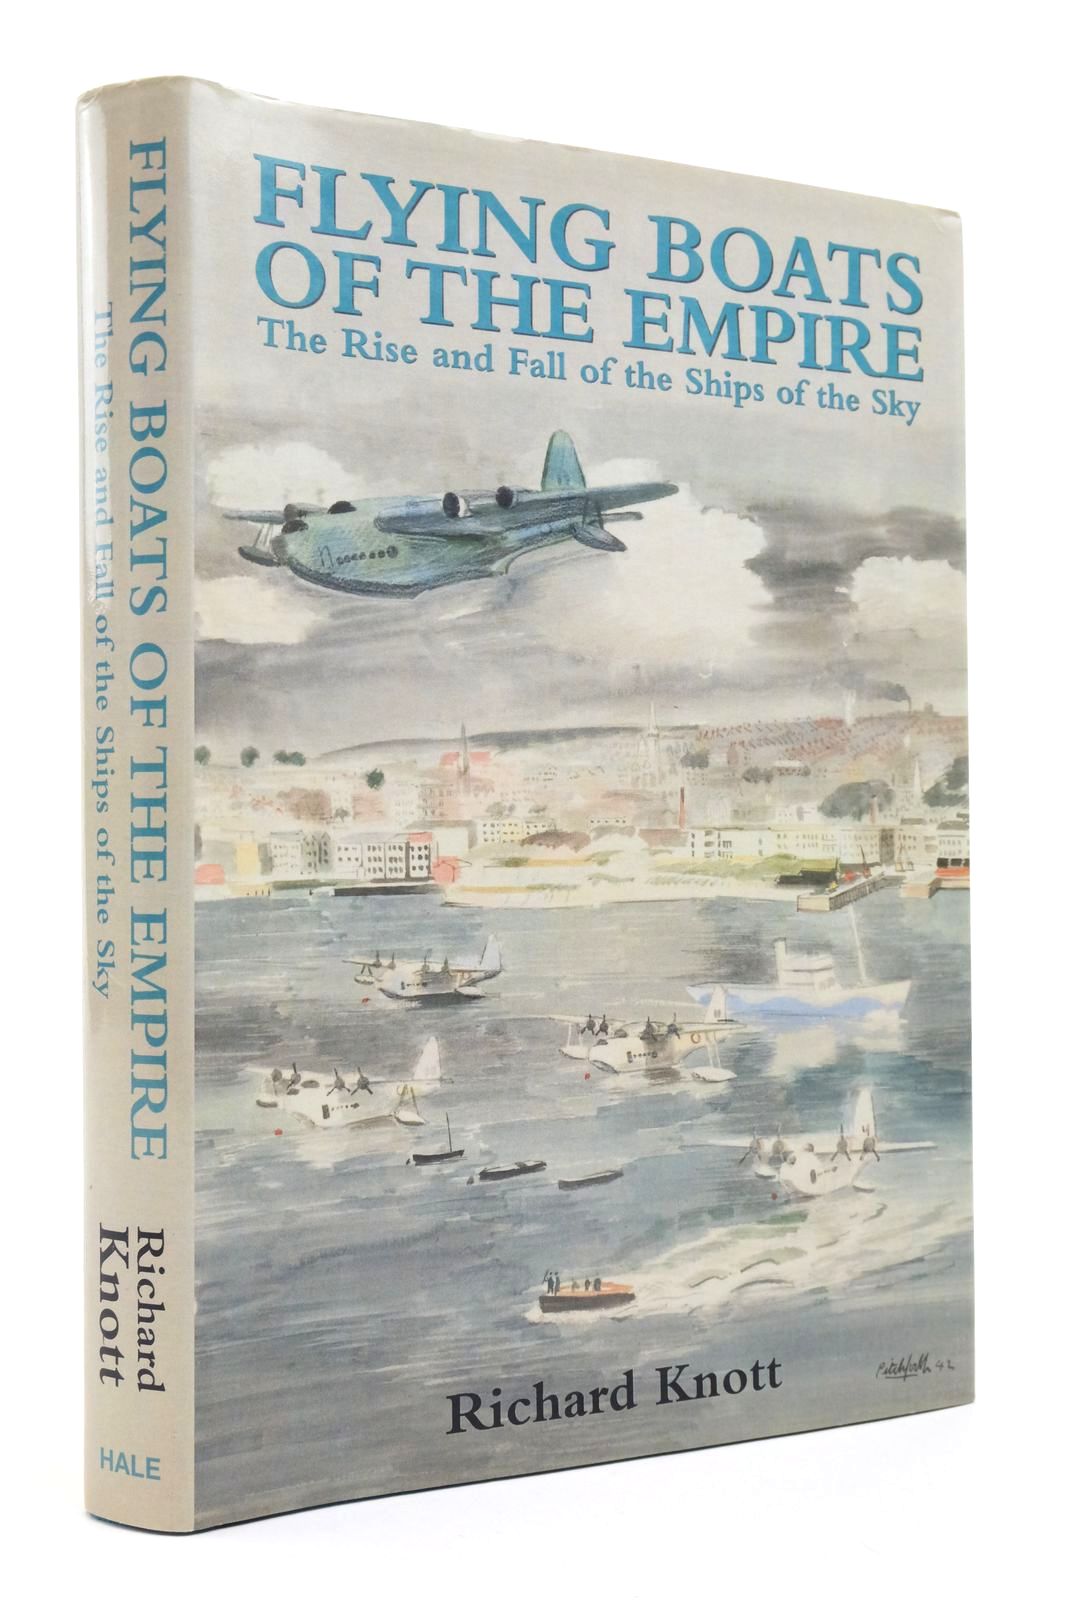 Photo of FLYING BOATS OF THE EMPIRE THE RISE AND FALL OF THE SHIPS OF THE SKY written by Knott, Richard published by Robert Hale (STOCK CODE: 2138437)  for sale by Stella & Rose's Books